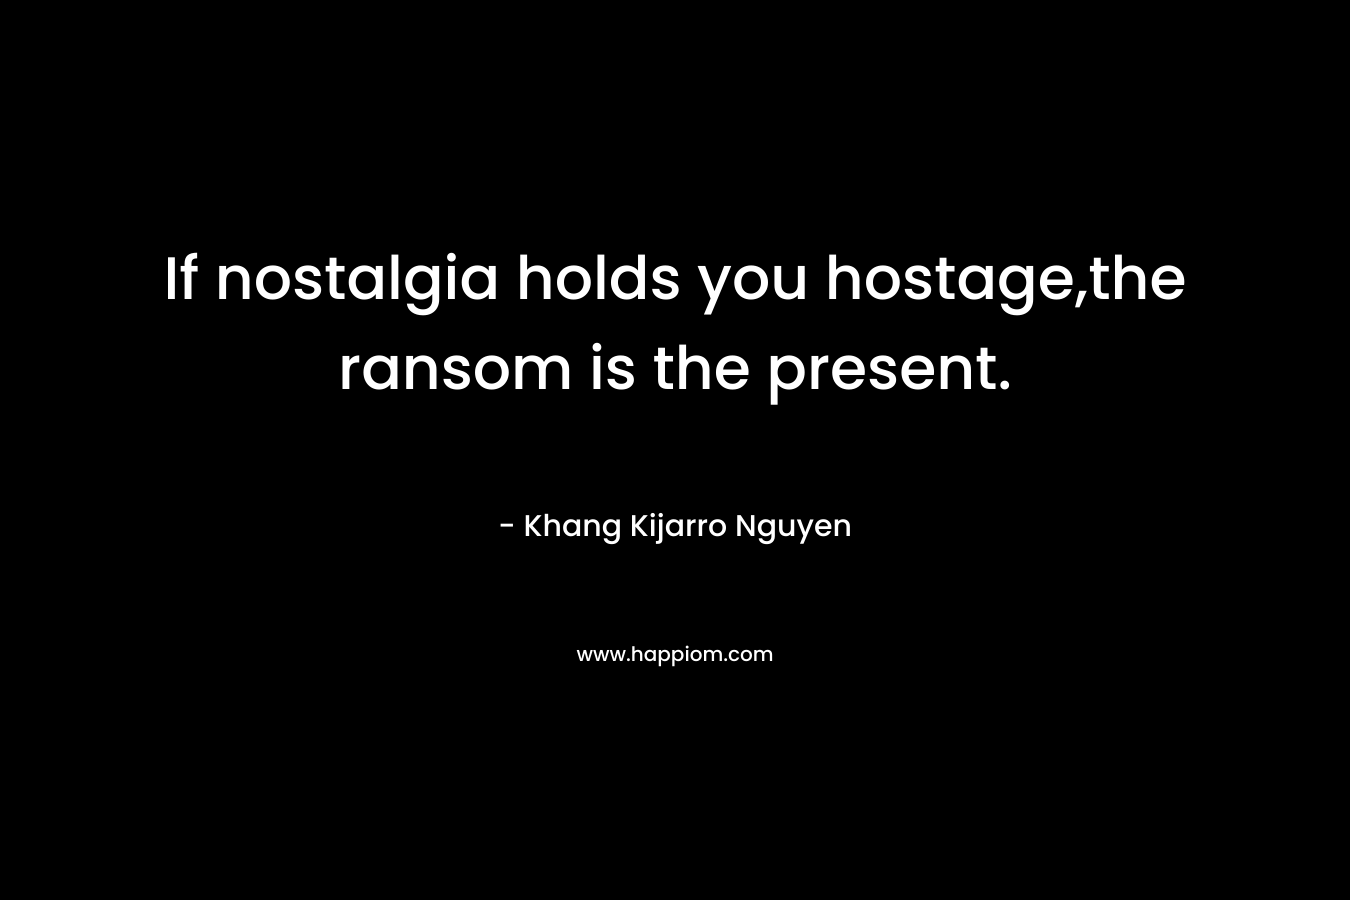 If nostalgia holds you hostage,the ransom is the present.